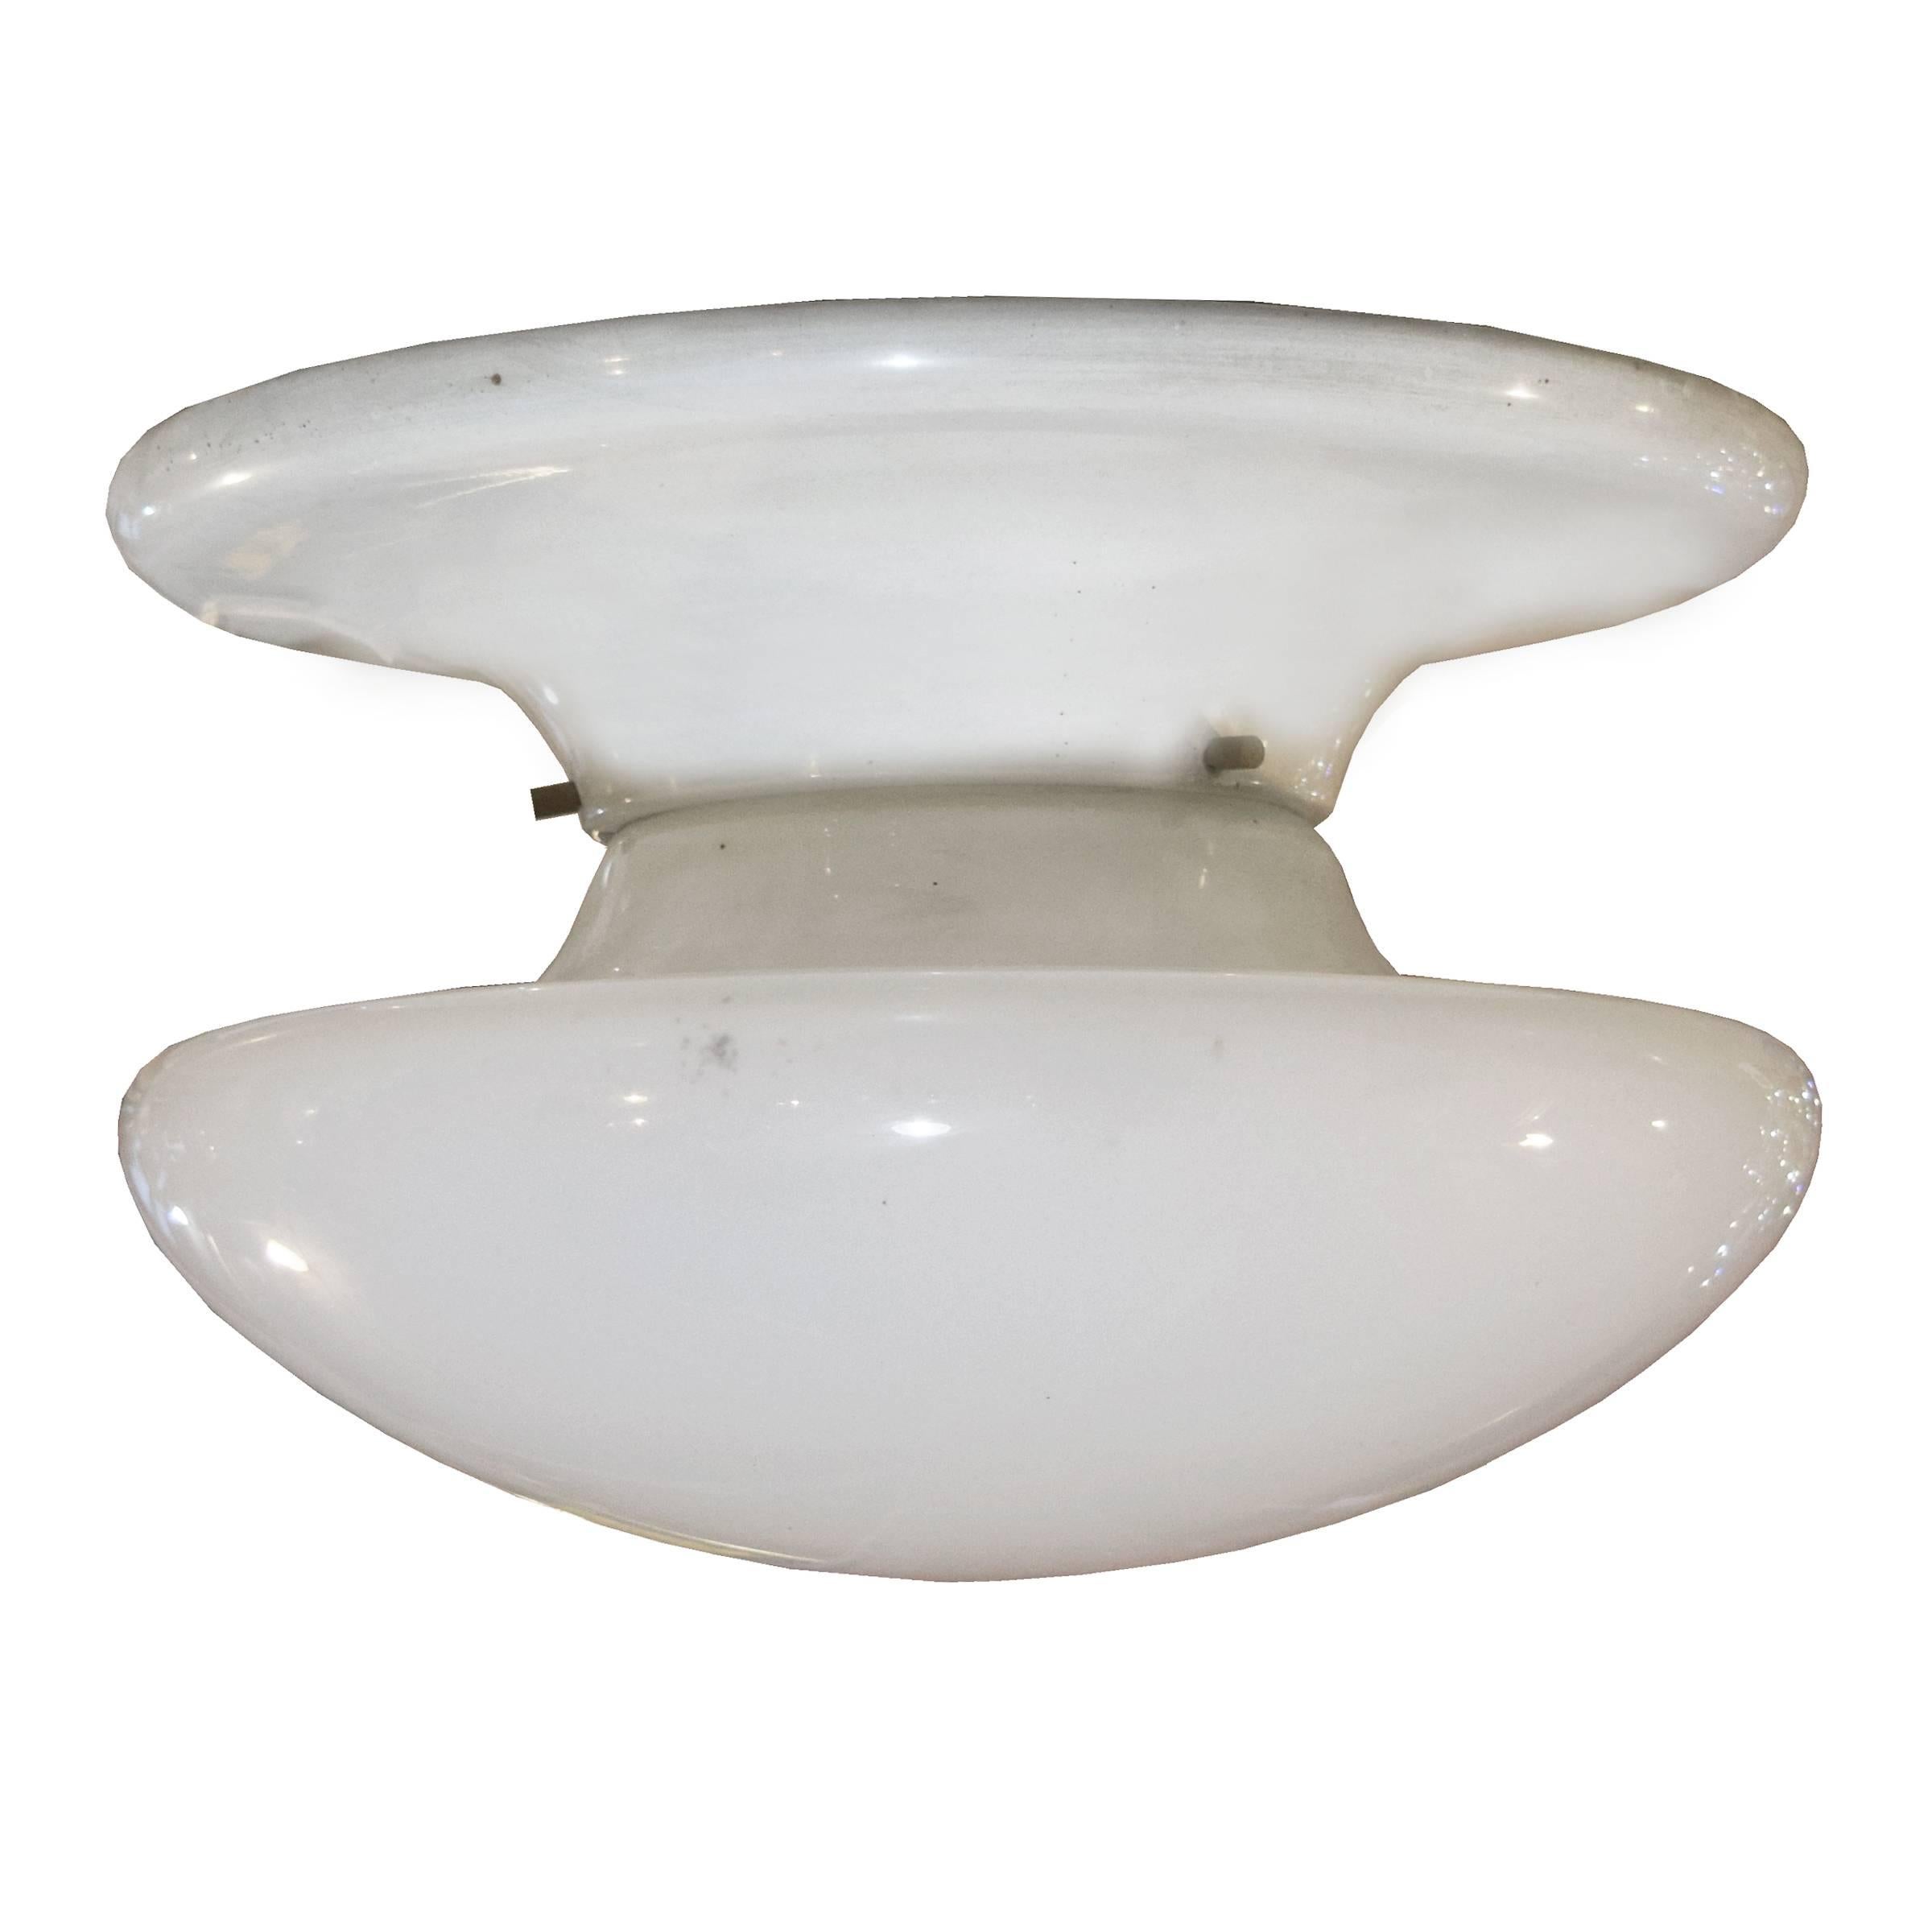 A charming Italian midcentury flush mount light fixture with an opaque glass shade. Many available.